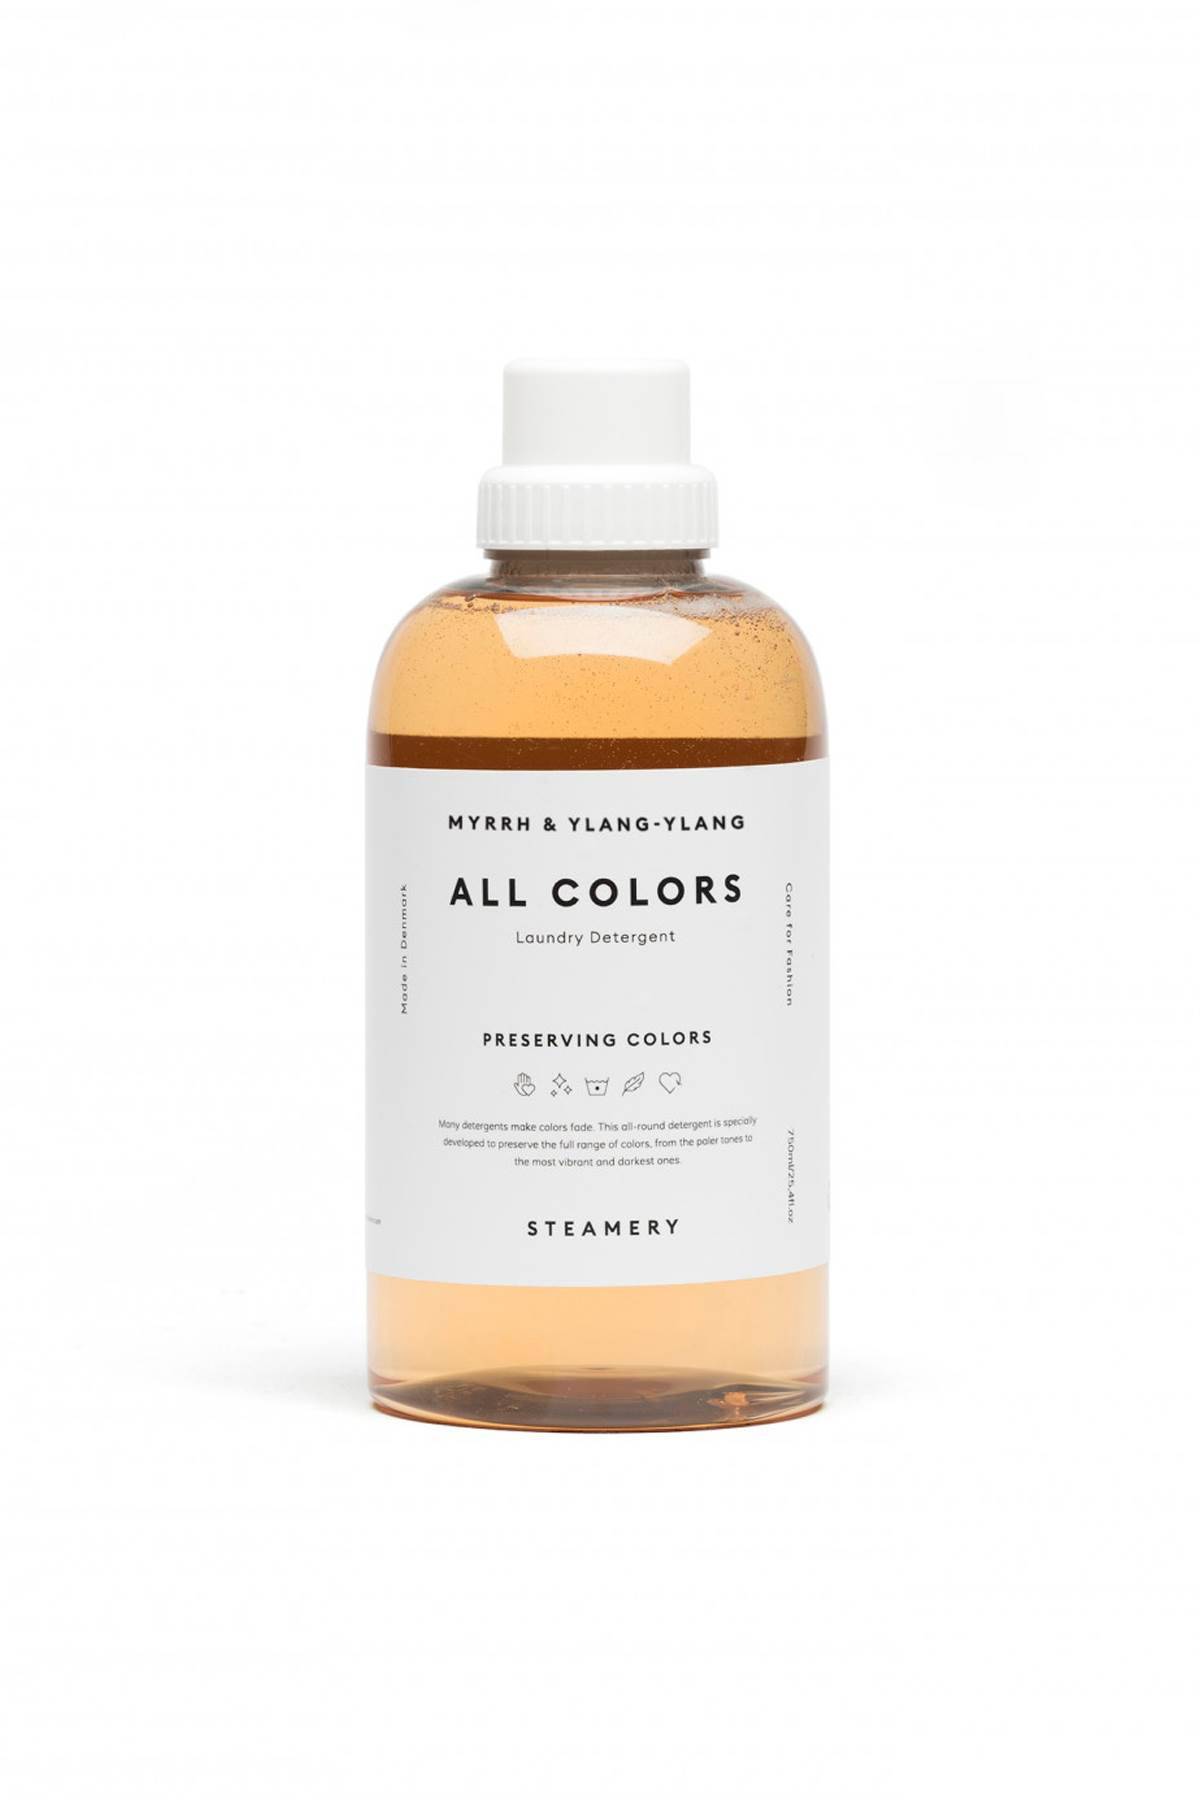 STEAMERY all colors laundry detergent